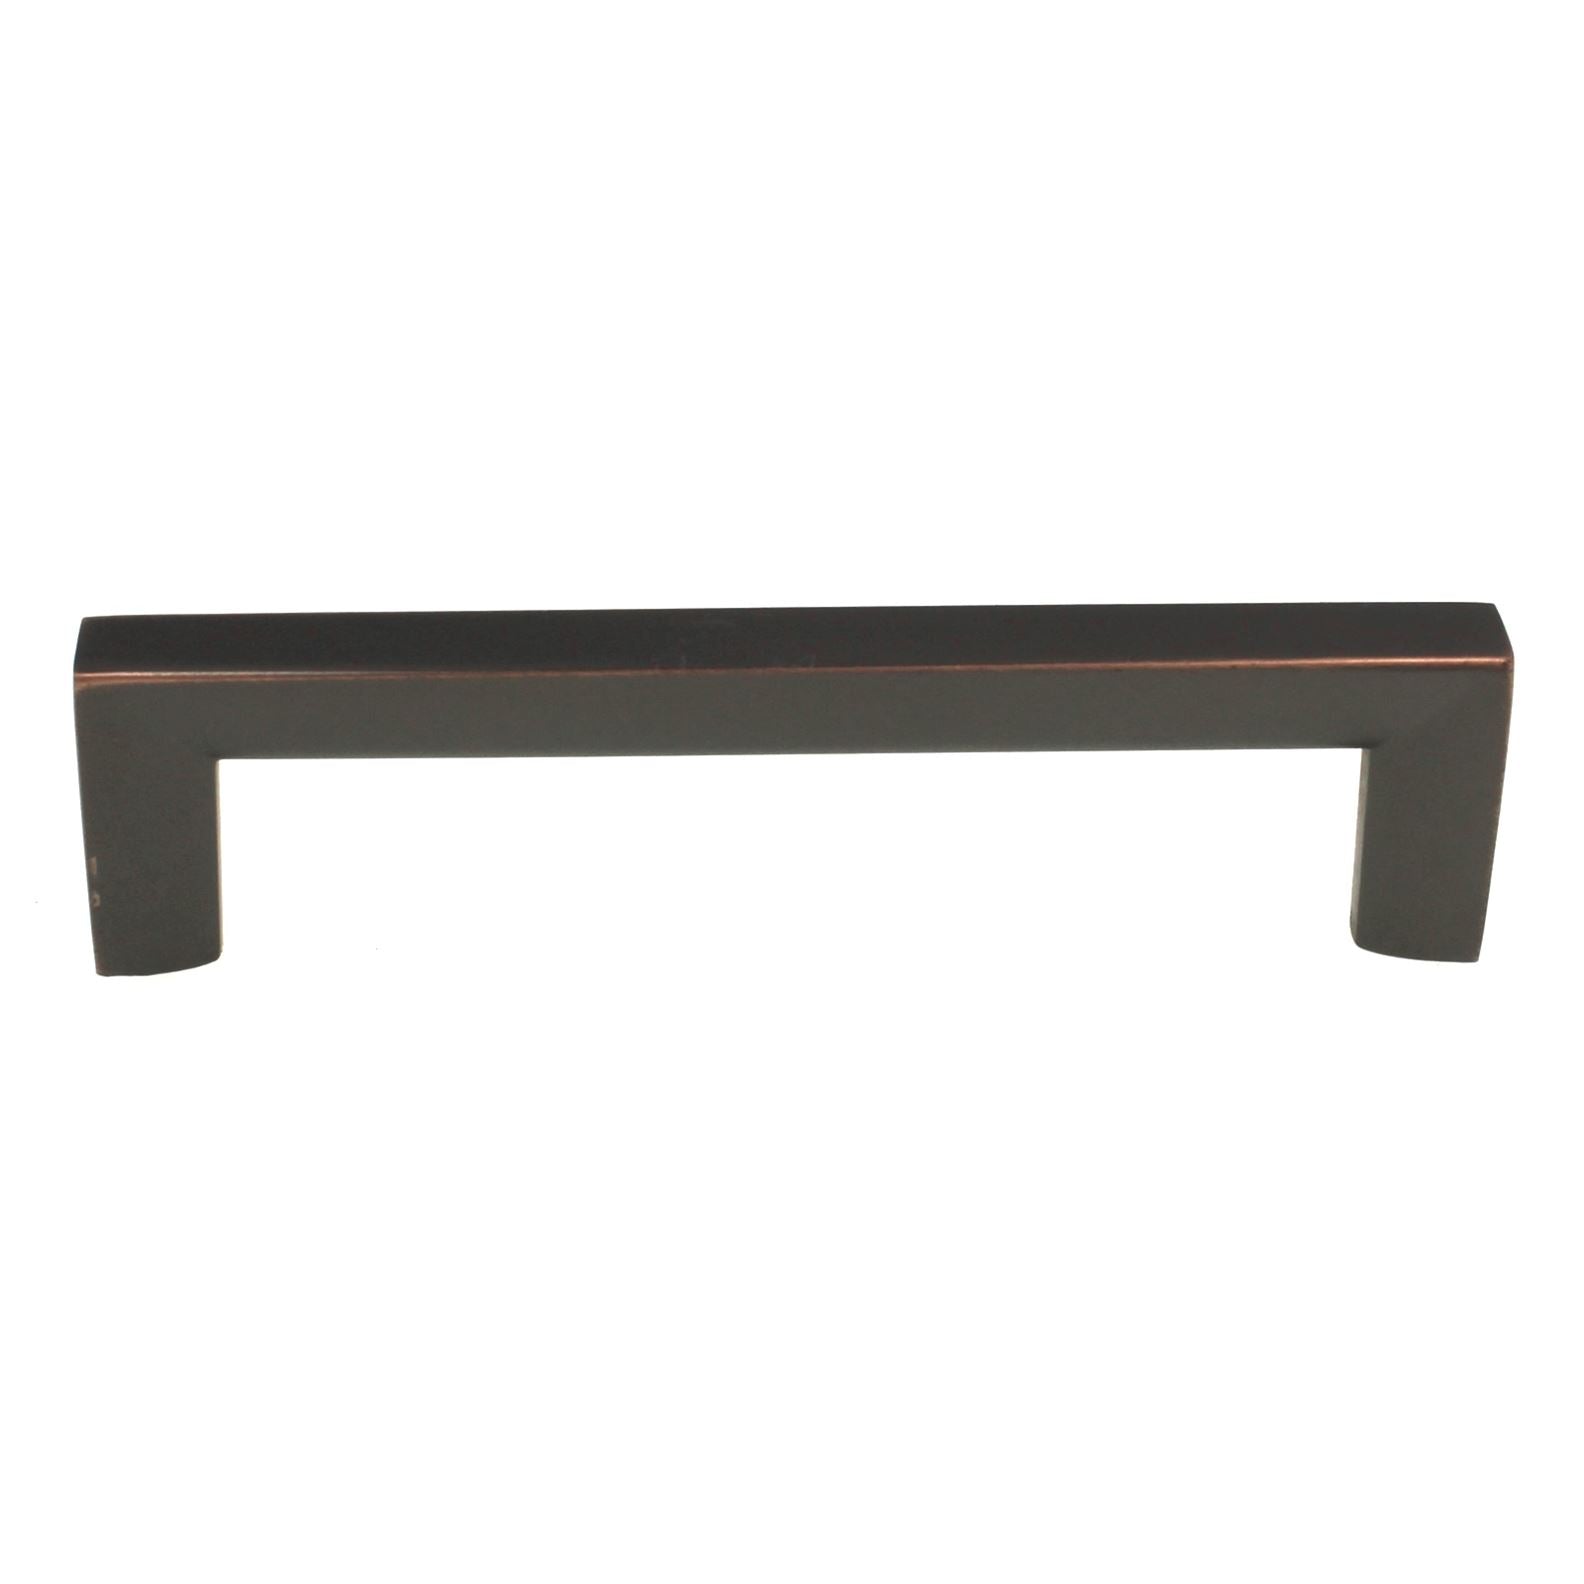 Hickory Hardware Rochester Oil-Rubbed Bronze 3 3/4" (96mm) Ctr. Pull P3112-OBH